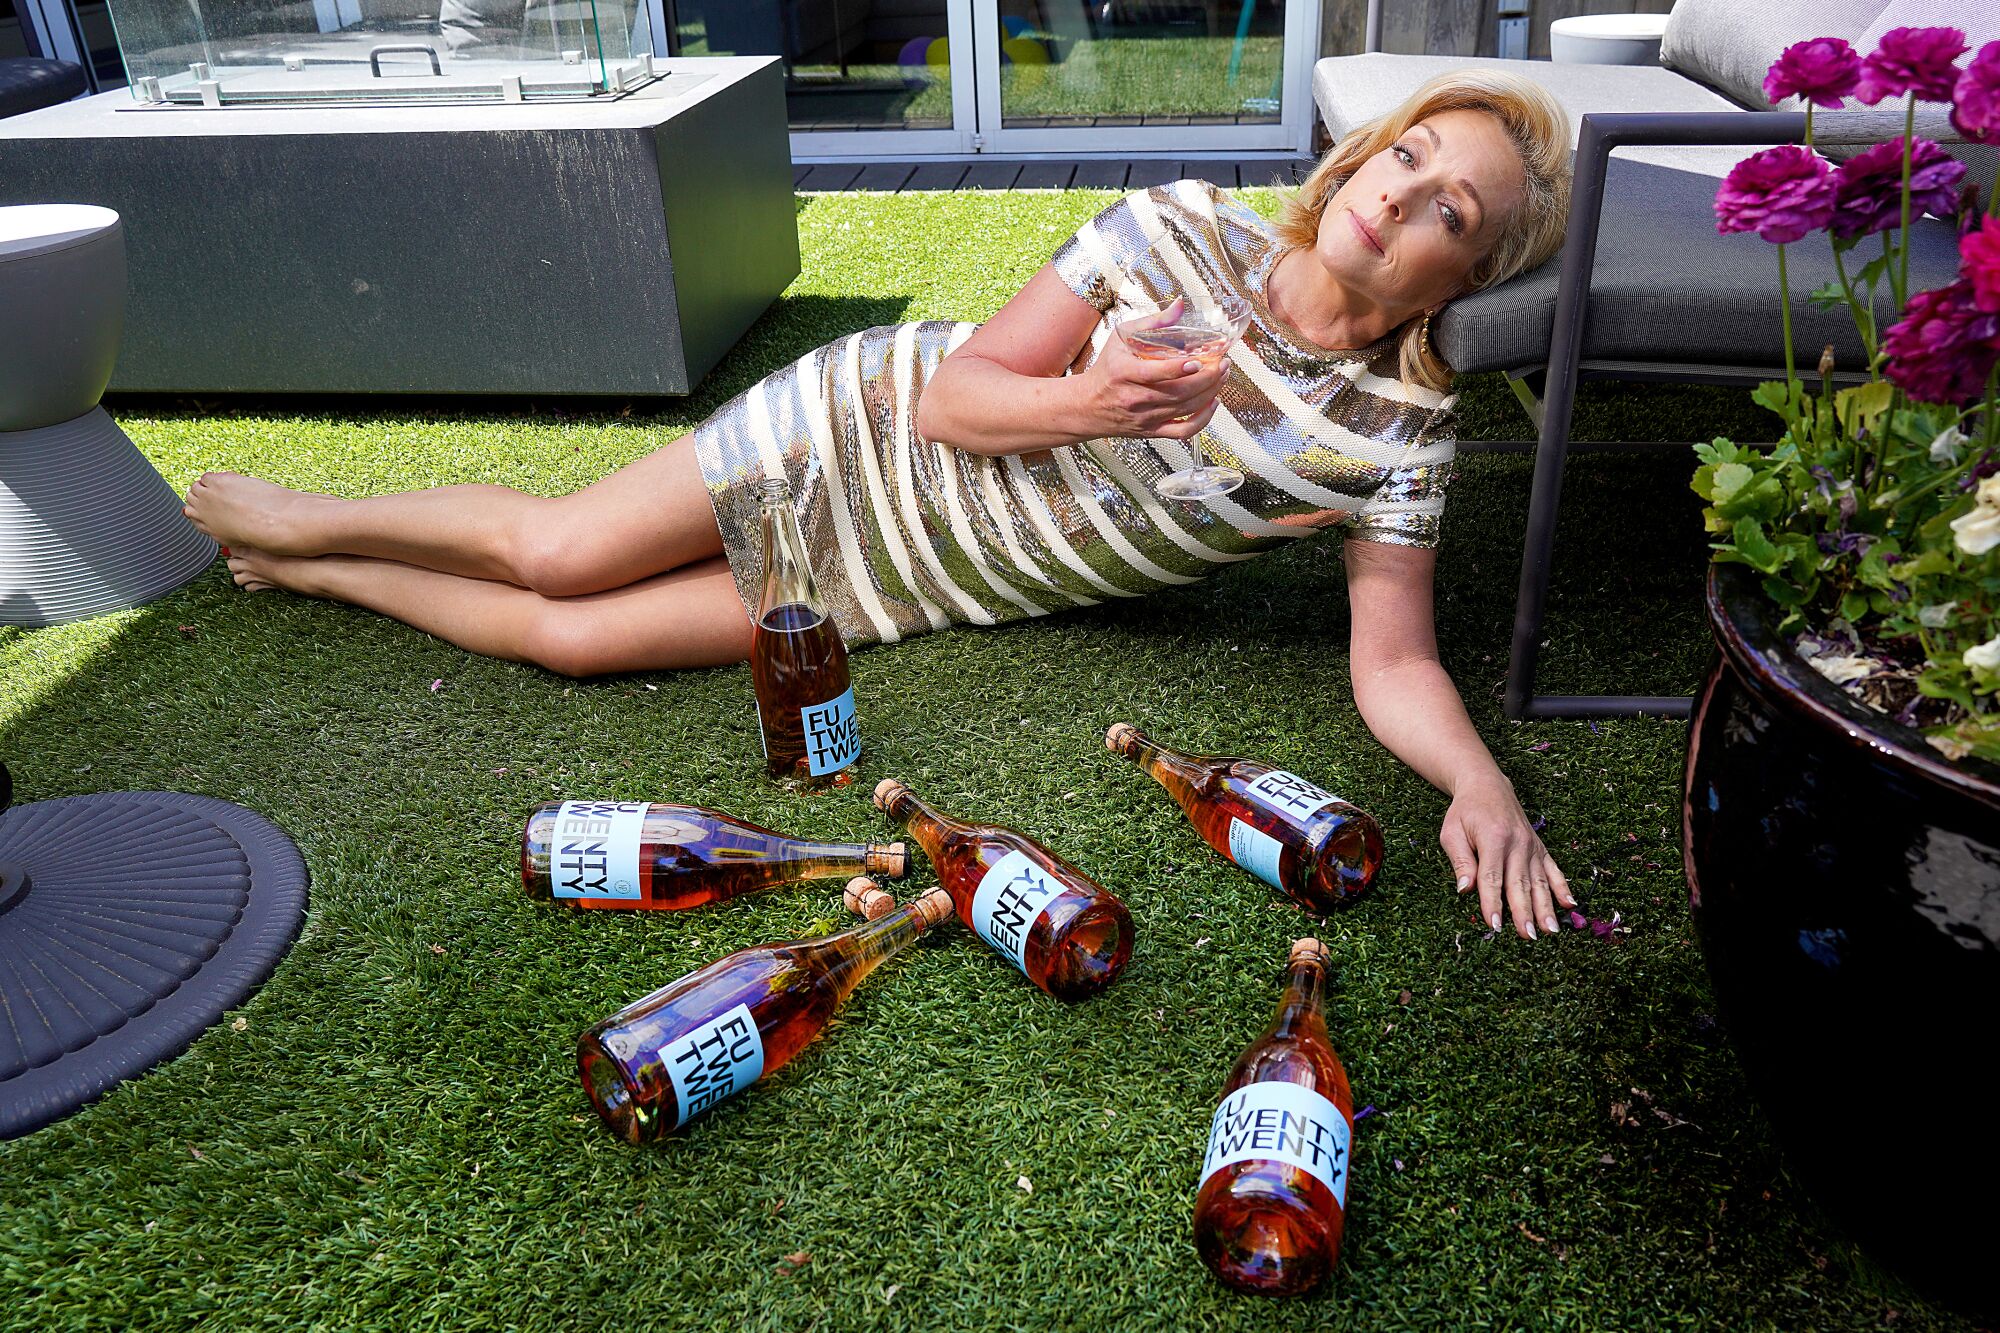 Jane Krakowski poses on fake grass surrounded by wine bottles with fake labels.